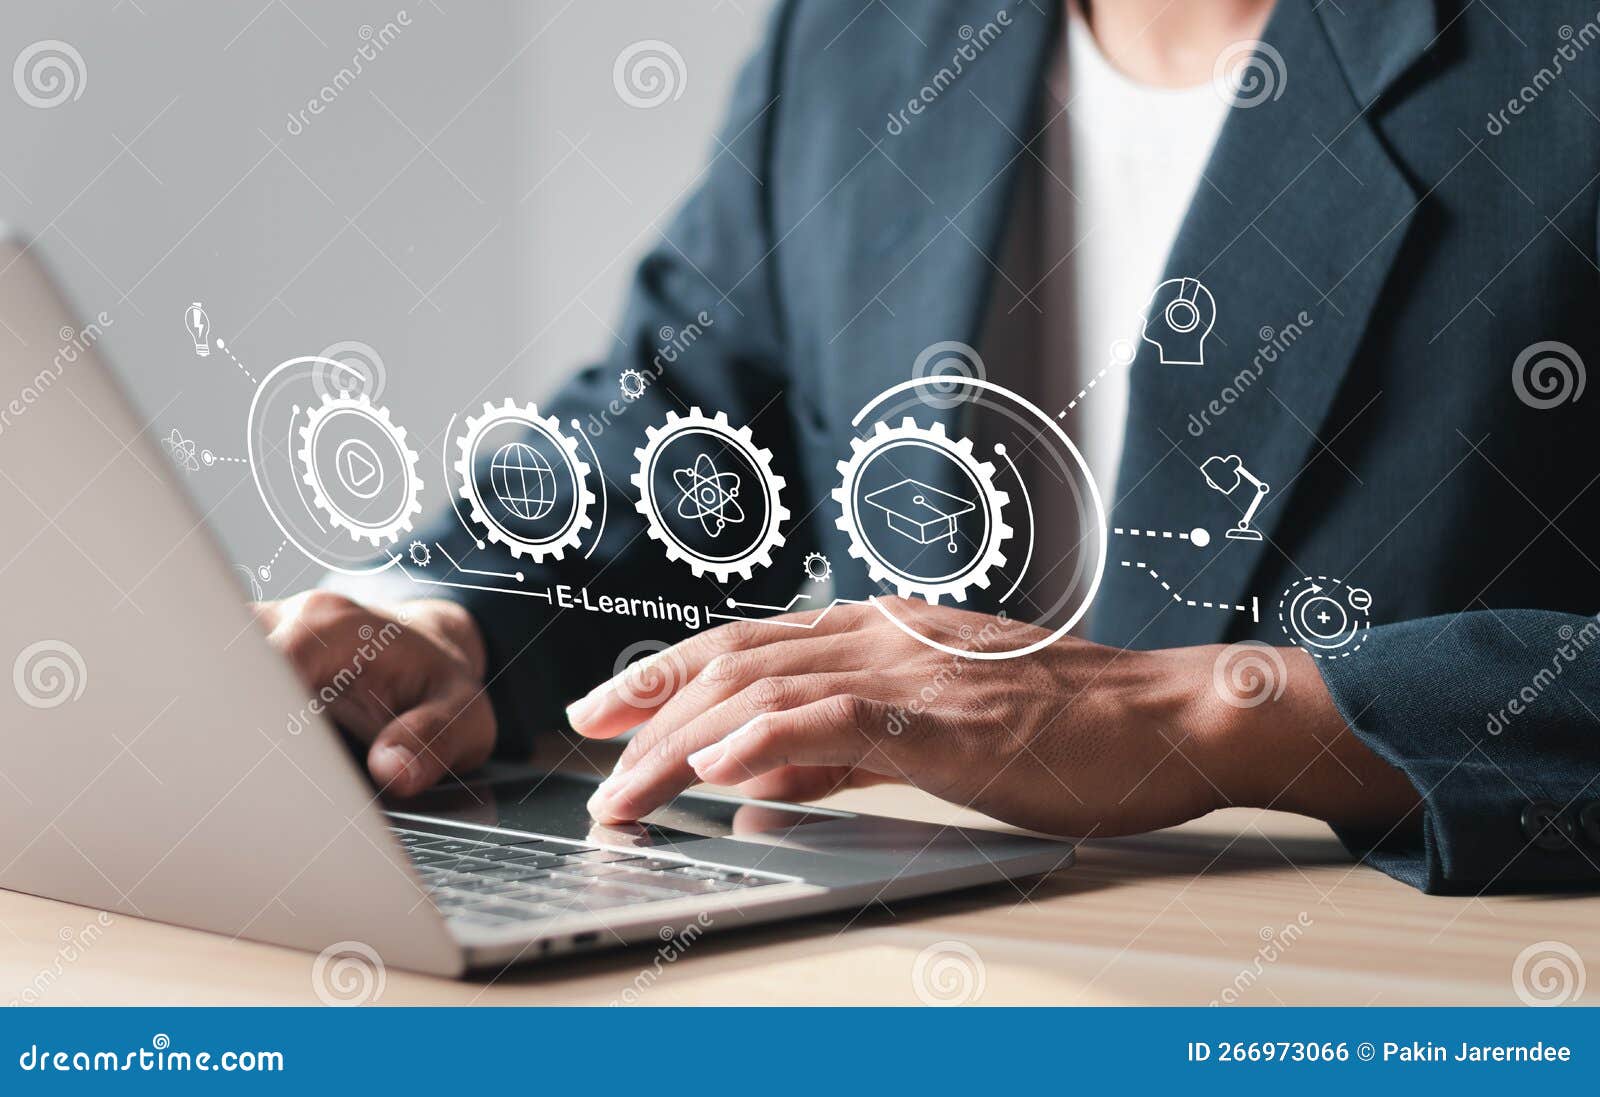 person who attends online lessons on a digital screen. education internet technology.